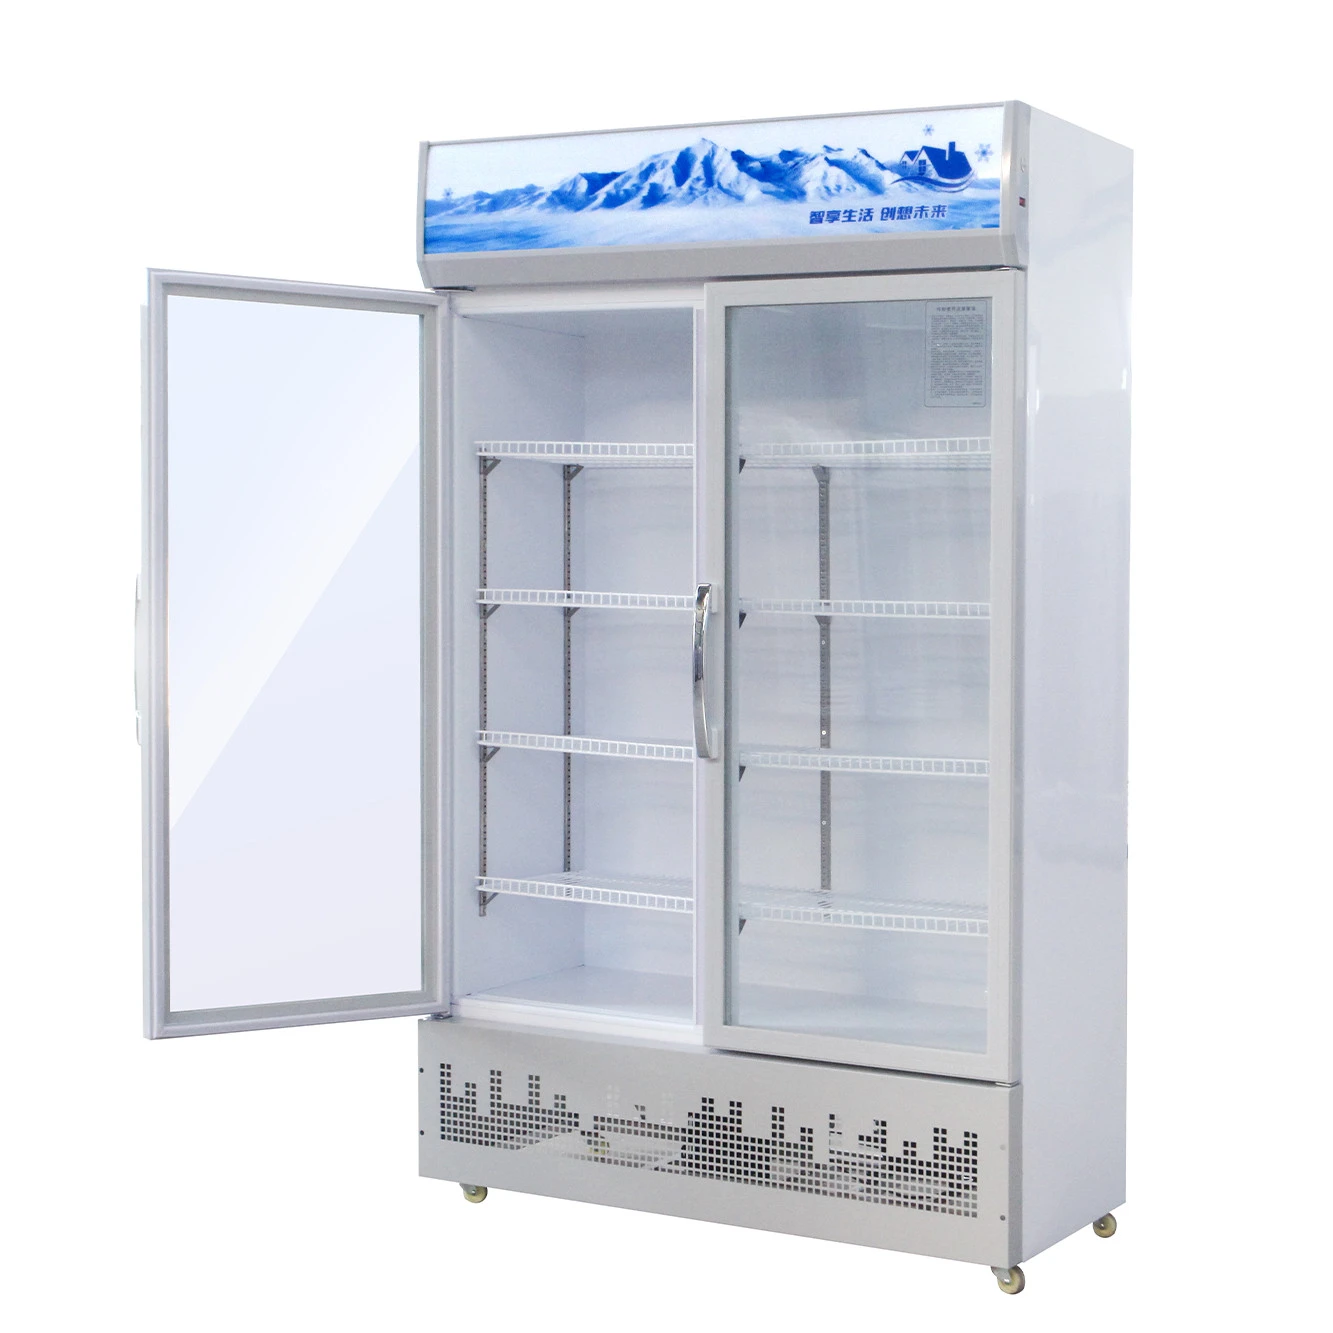 Cold drink refrigerator Pepsi display refrigerator from Chinese factory commercial vertical beverage display cabinet cooler